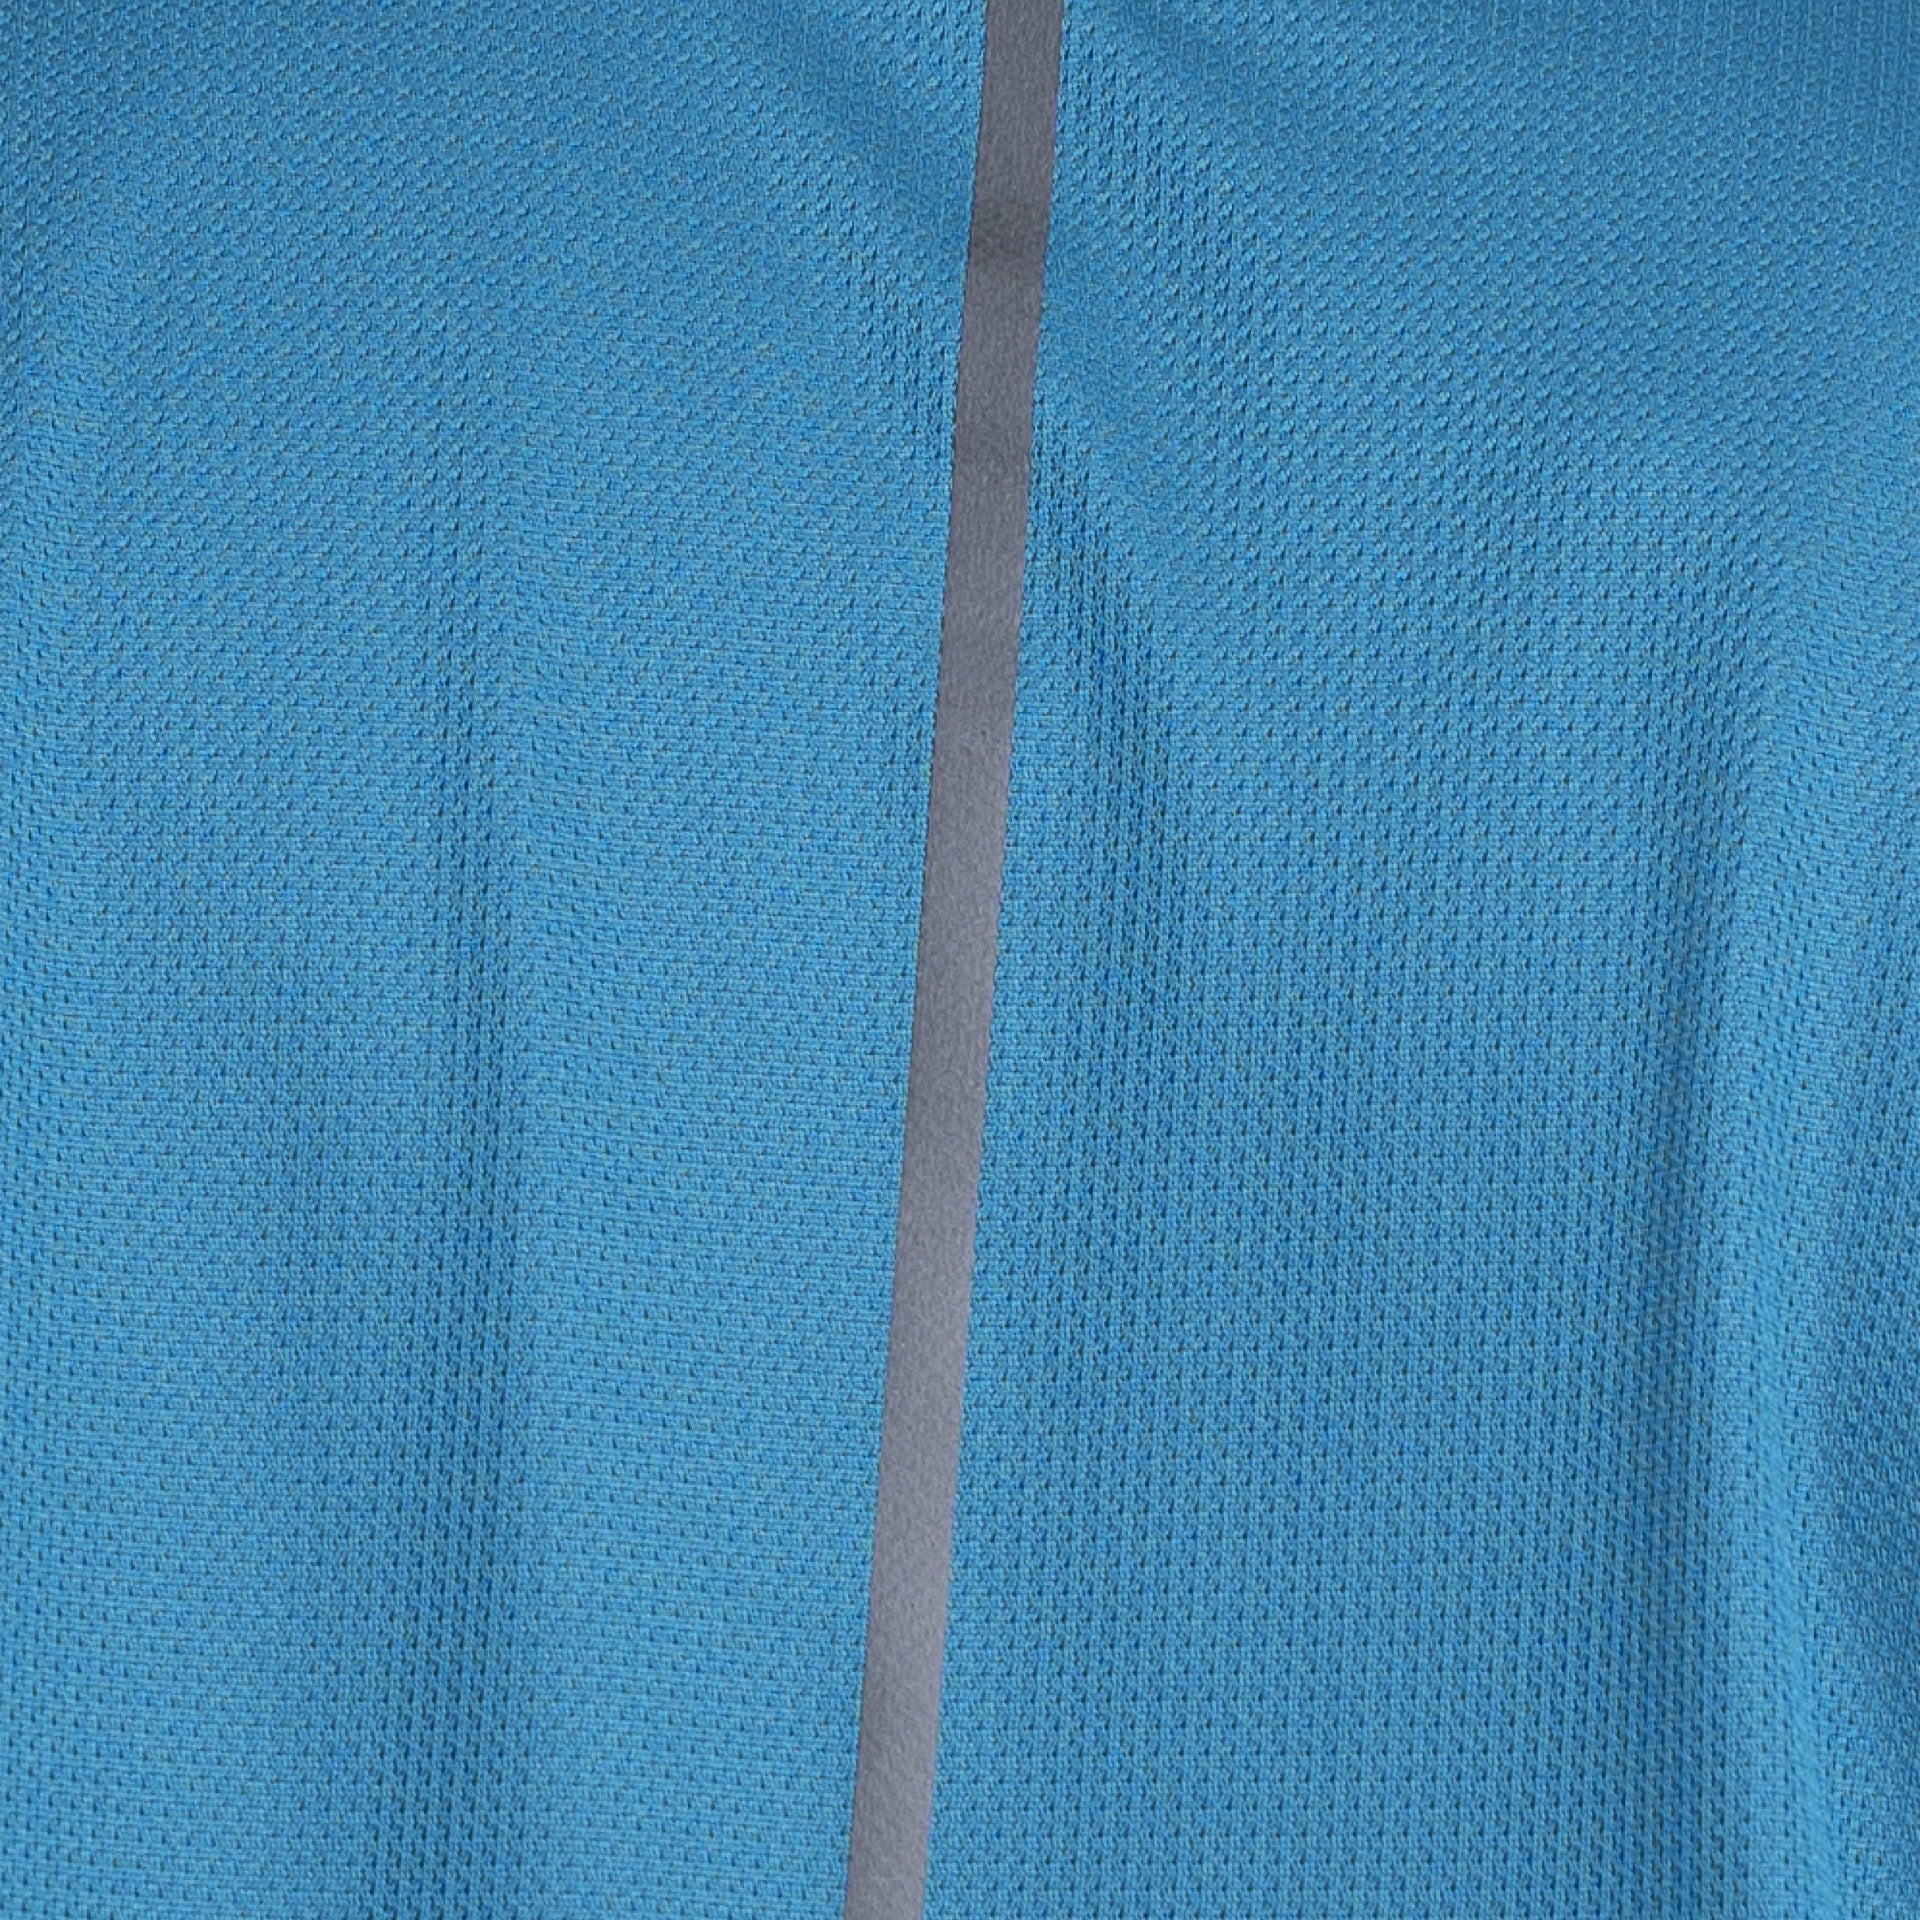 Turquoise Sports T-shirt From Weaver Design